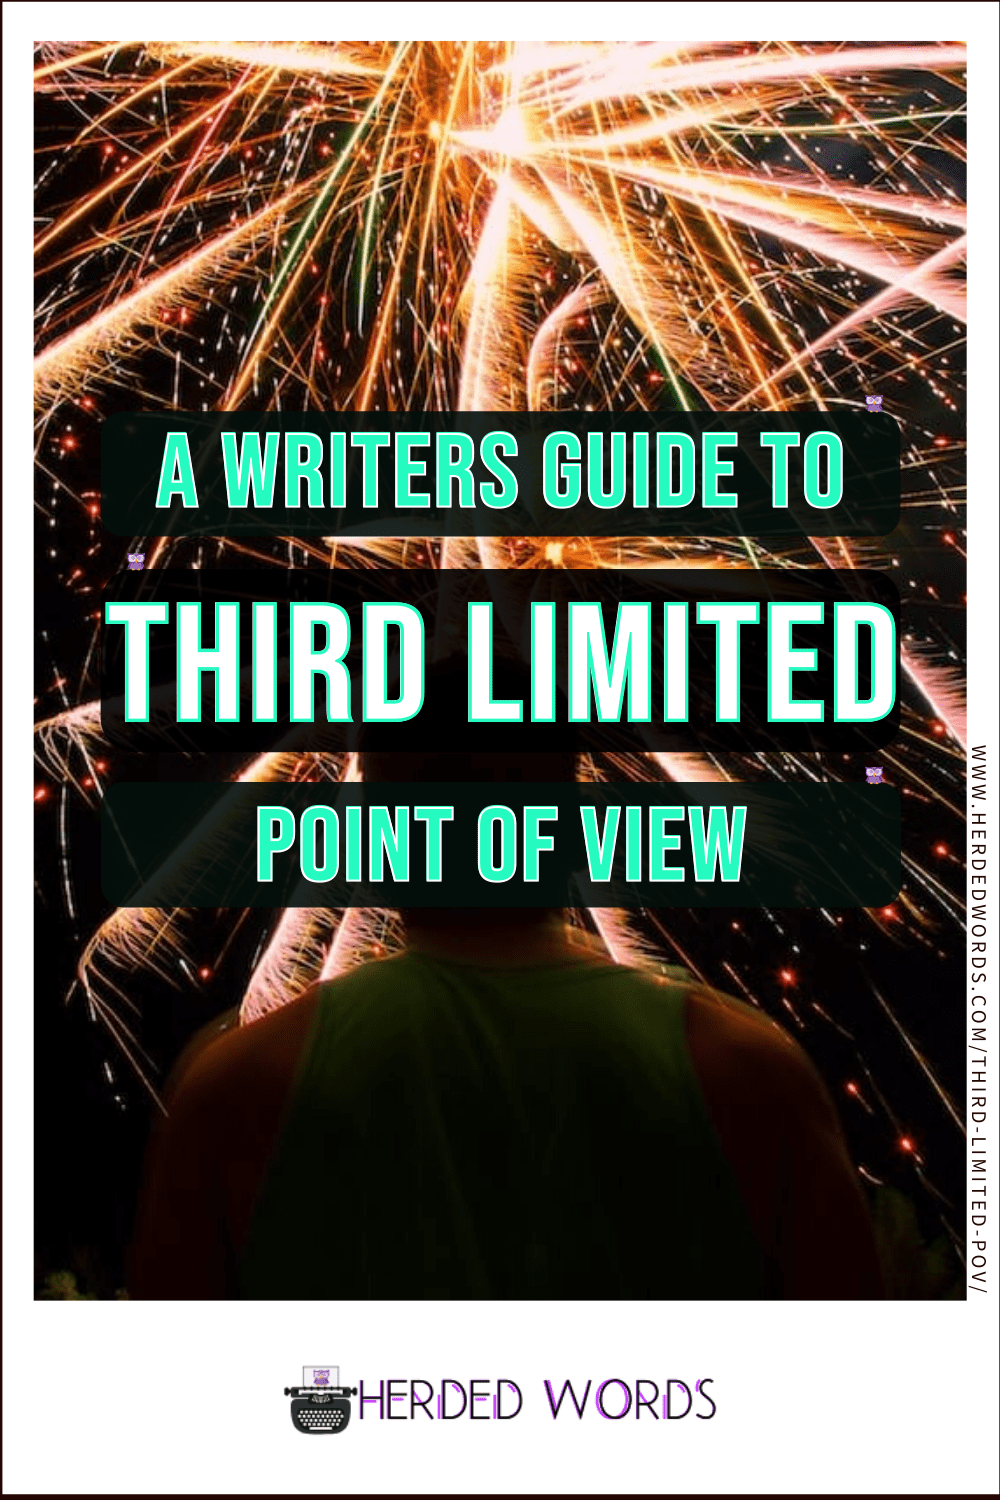 Image link to a writer's guide to Third Limited Point of View